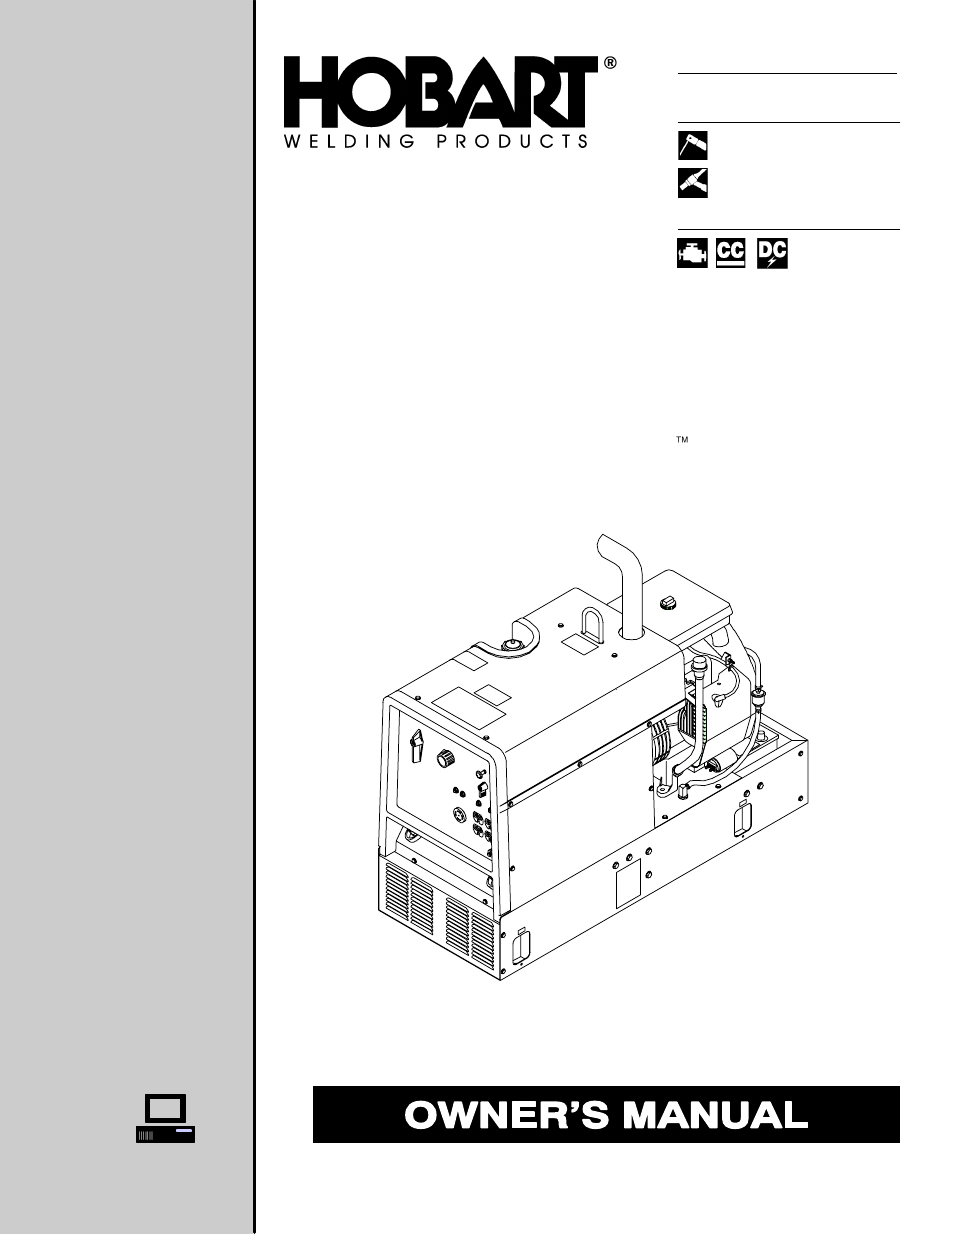 Hobart Welding Products CHAMPION OM-493 User Manual | 56 pages